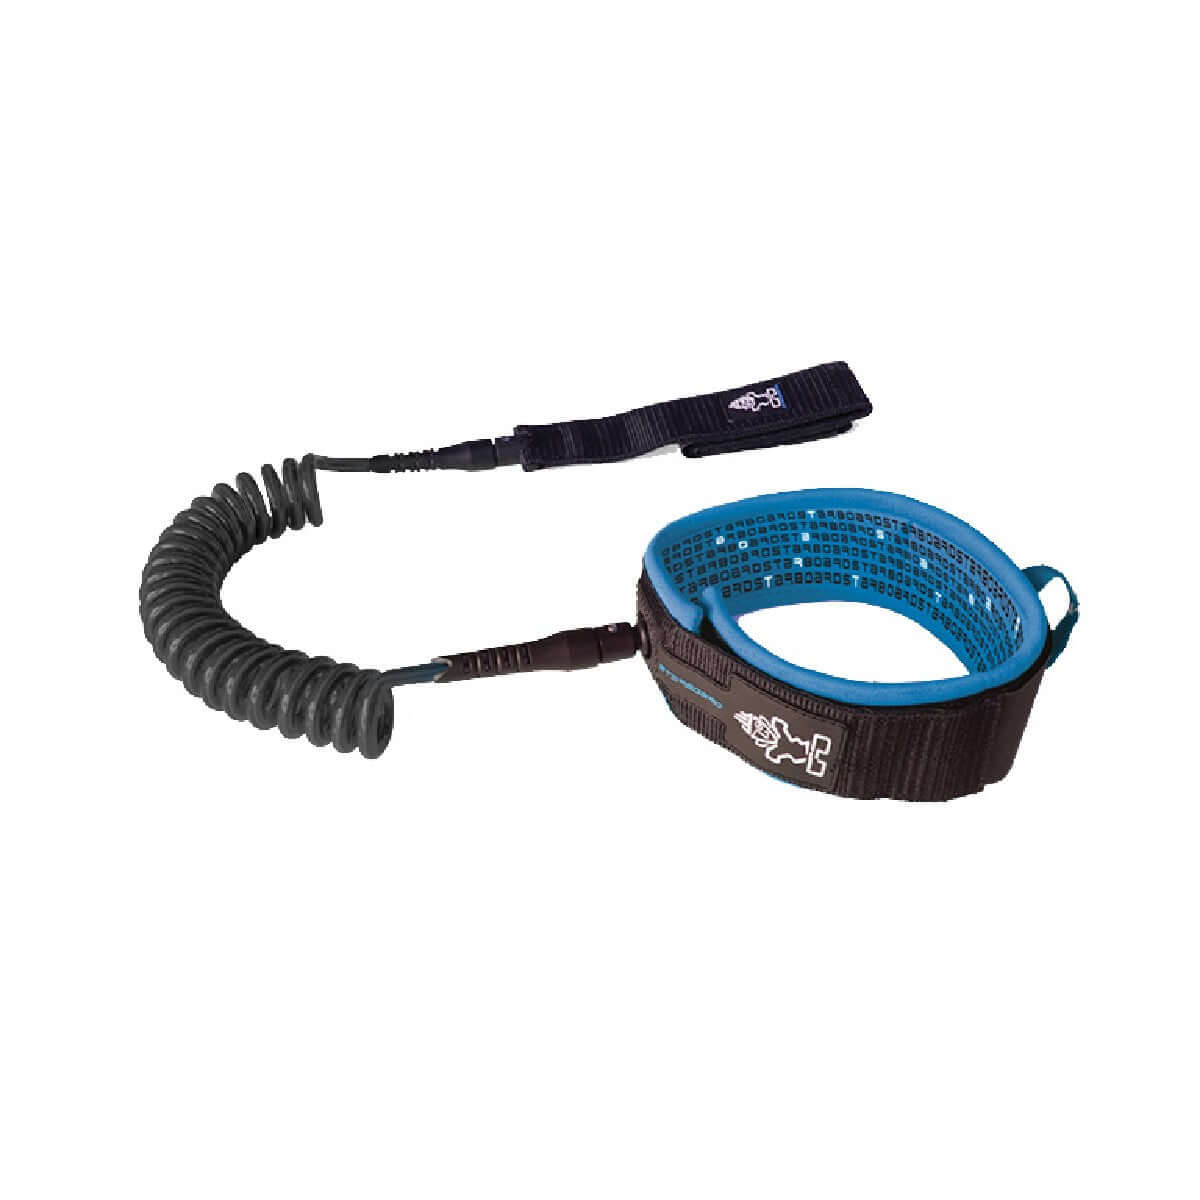 Starboard SB24 ANKLE CUFF COIL RACE LEASH 6MM – 8 FT – SUP Zubehör